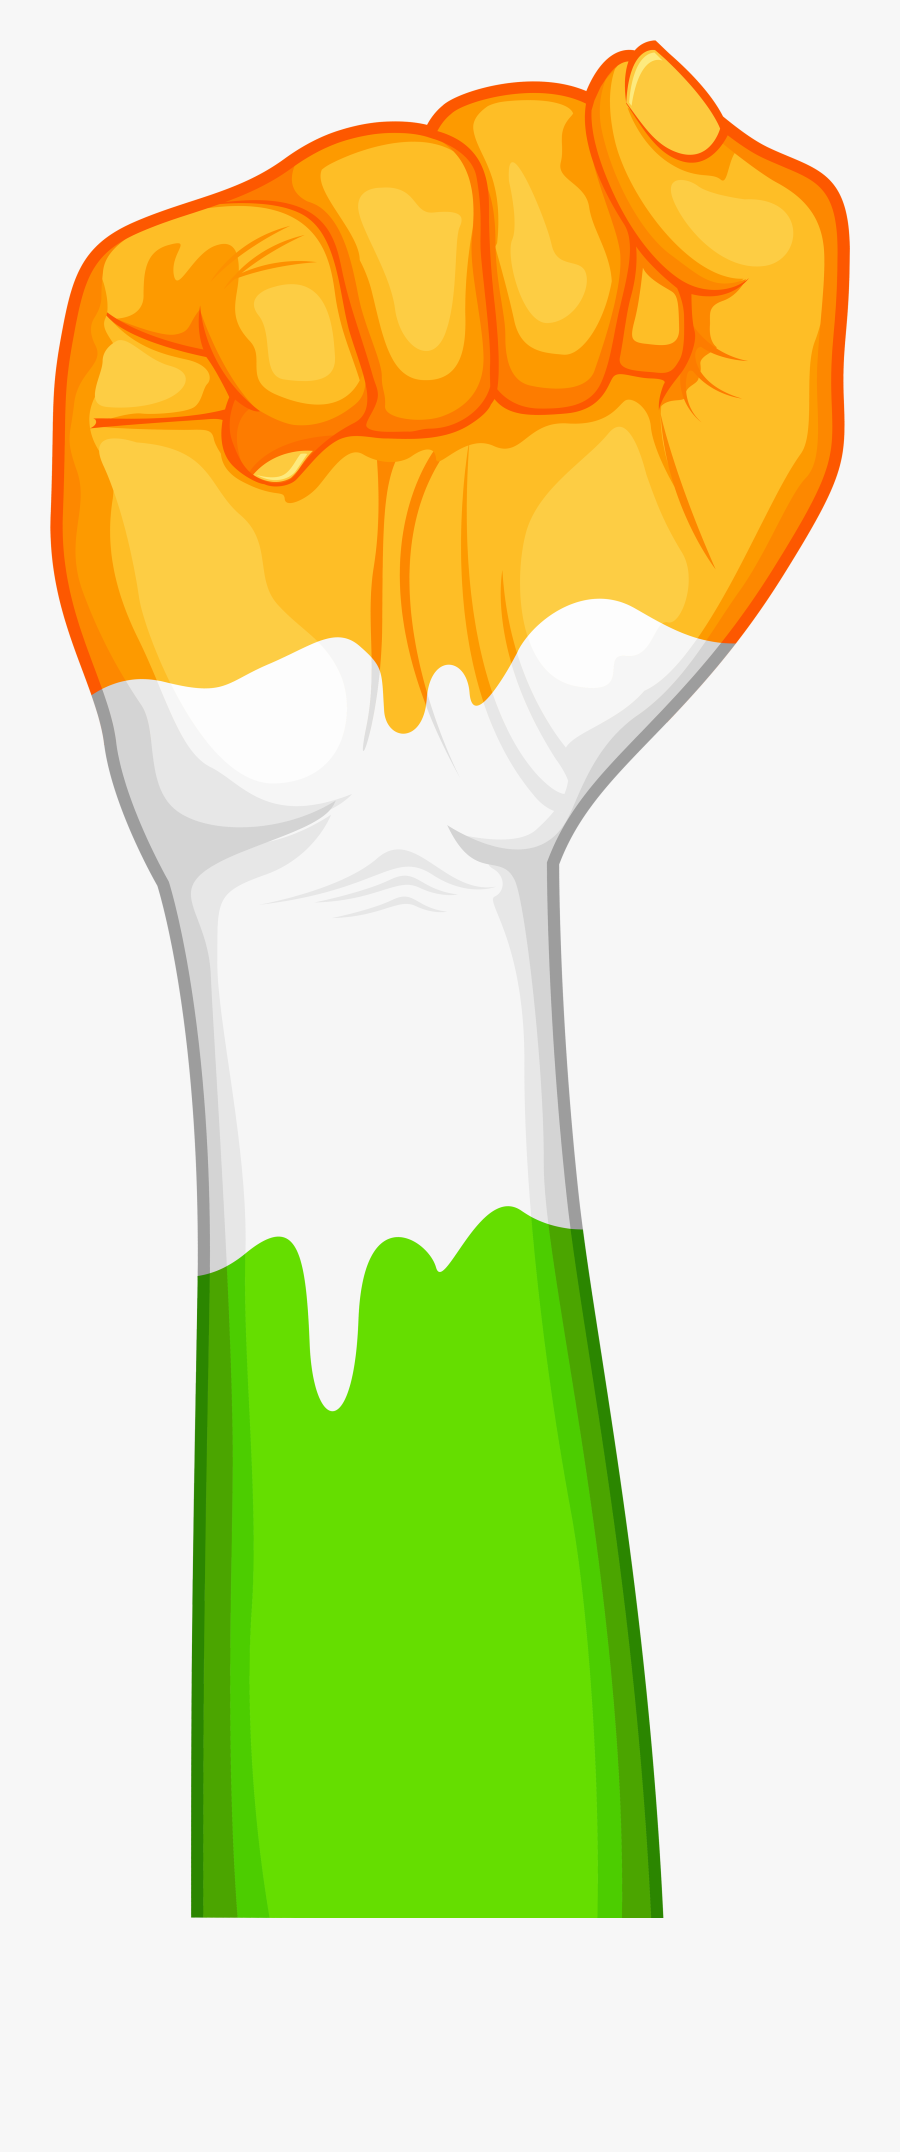 26 January - Independence Day Images Download, Transparent Clipart